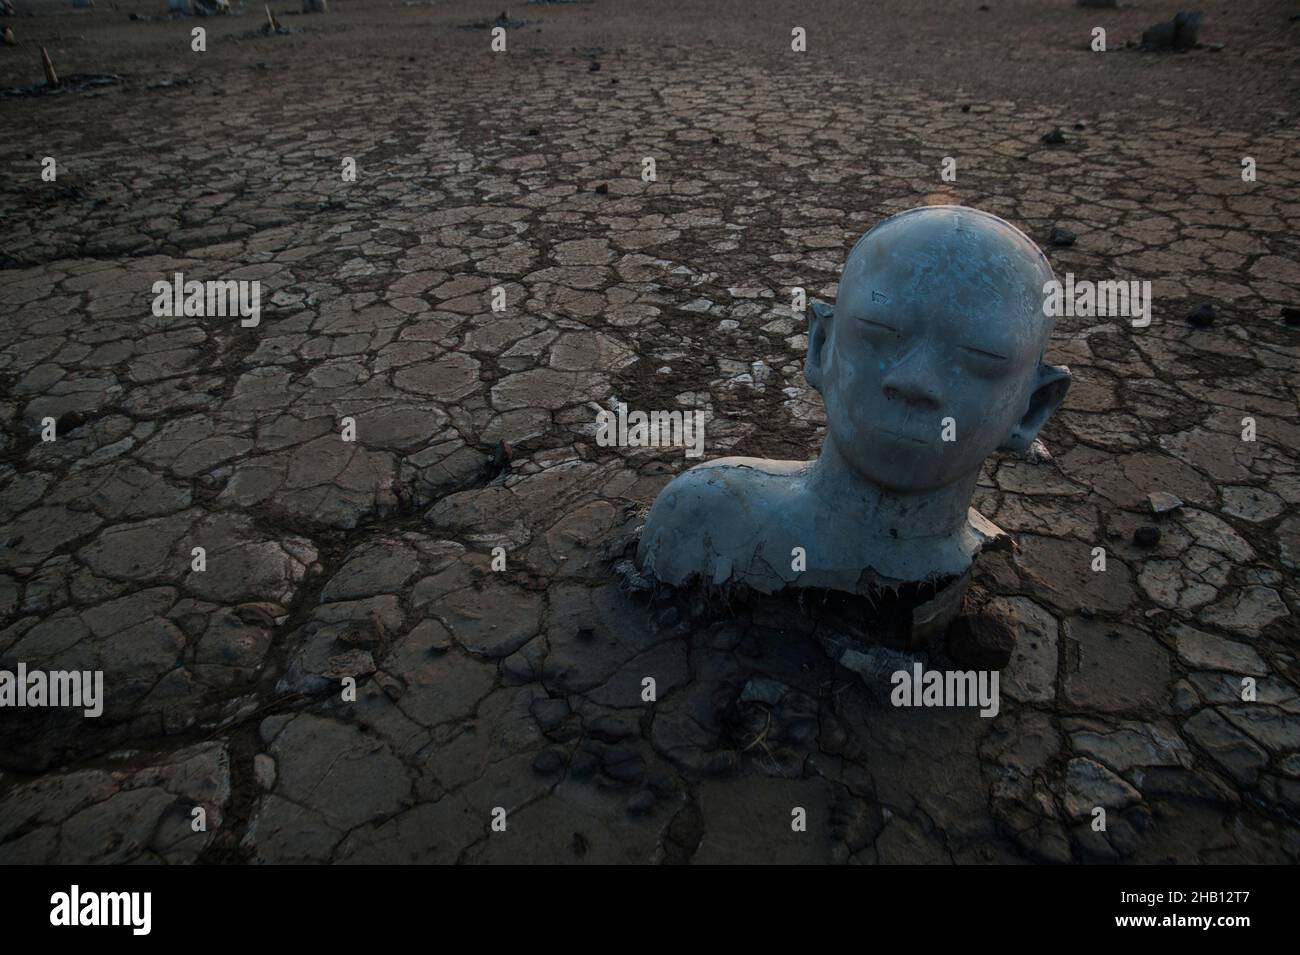 Photo dated October 19, 2016 - The cymbol of public protests statue against the disaster handling seen amid the Lapindo volcanic mudflow spreads ways in Sidoarjo, East Java province, Indonesia. Since May 29, 2006 until now, as 1,143.3 hectares area land has changes be the natural territory of the world's largest mud volcano were belches water, oil, methane gas and mud everytime. The geological activity is a contributor to methane gas emissions amount as the largest natural gas manifestation on earth, based on the study report published in the journal Scientific Reports on February 18, 2021. Ph Stock Photo